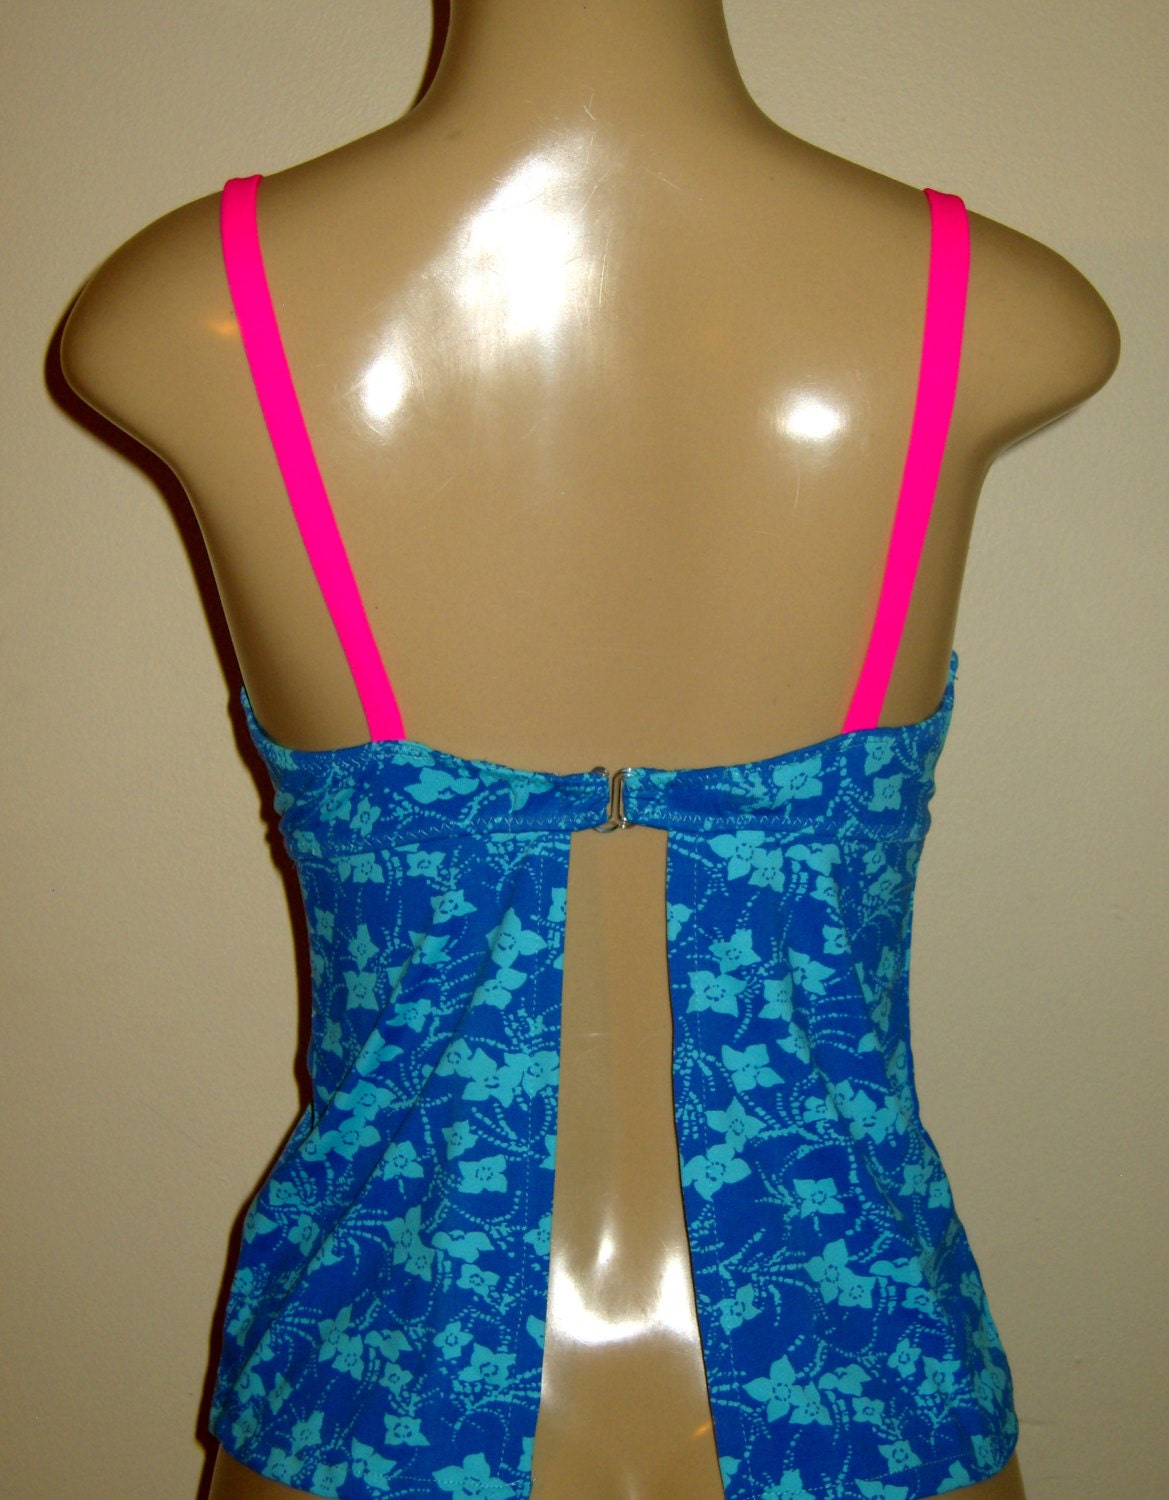 Apron Back Underwire Tankinis Larger Busts Open Backs -  Israel